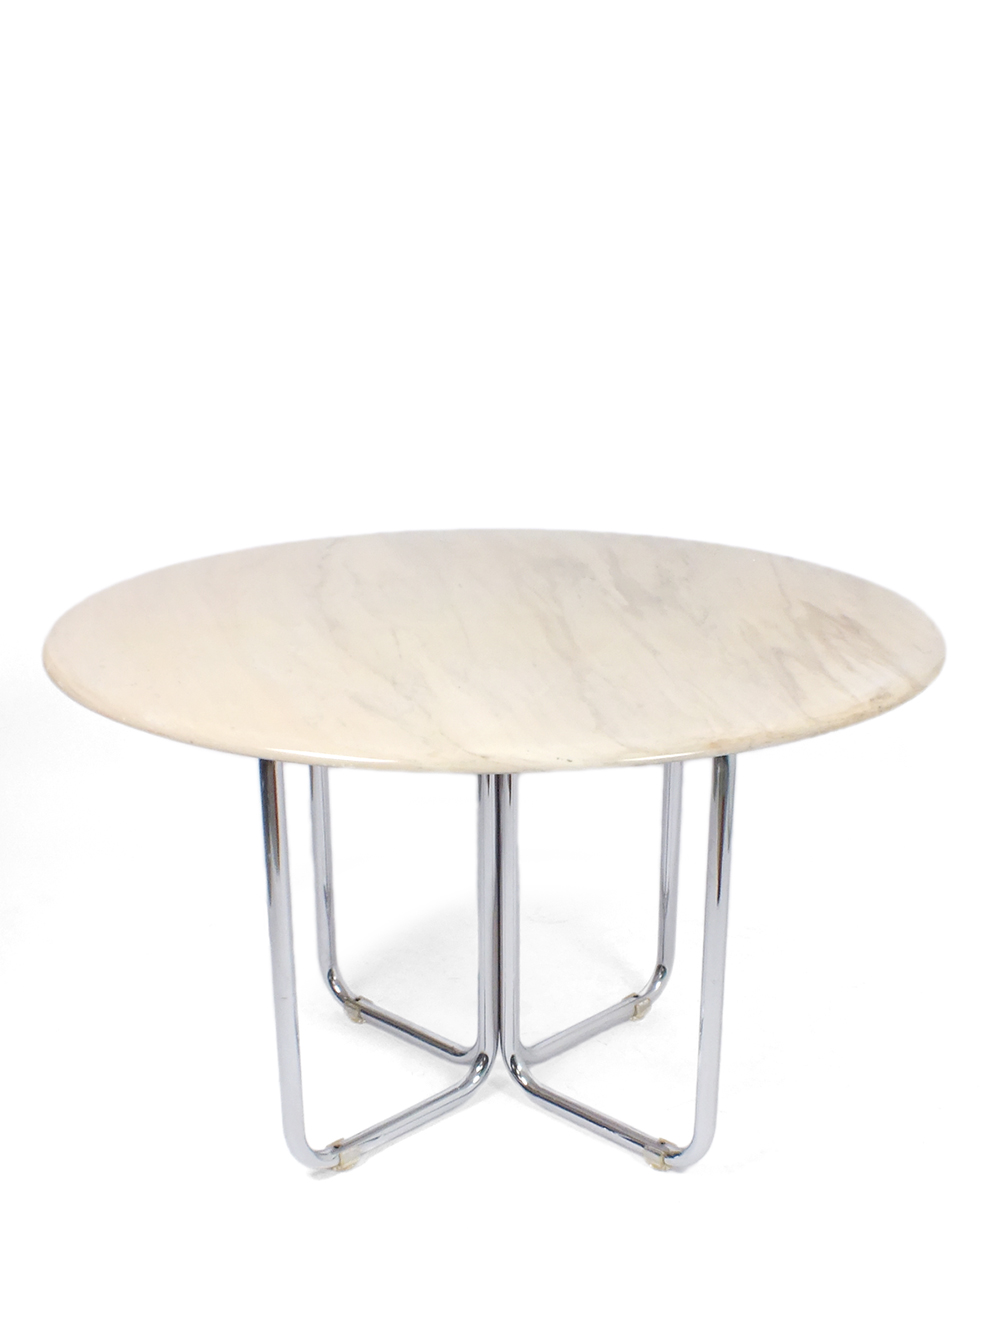 Round dining table chrome legs and natural stone top VAEN